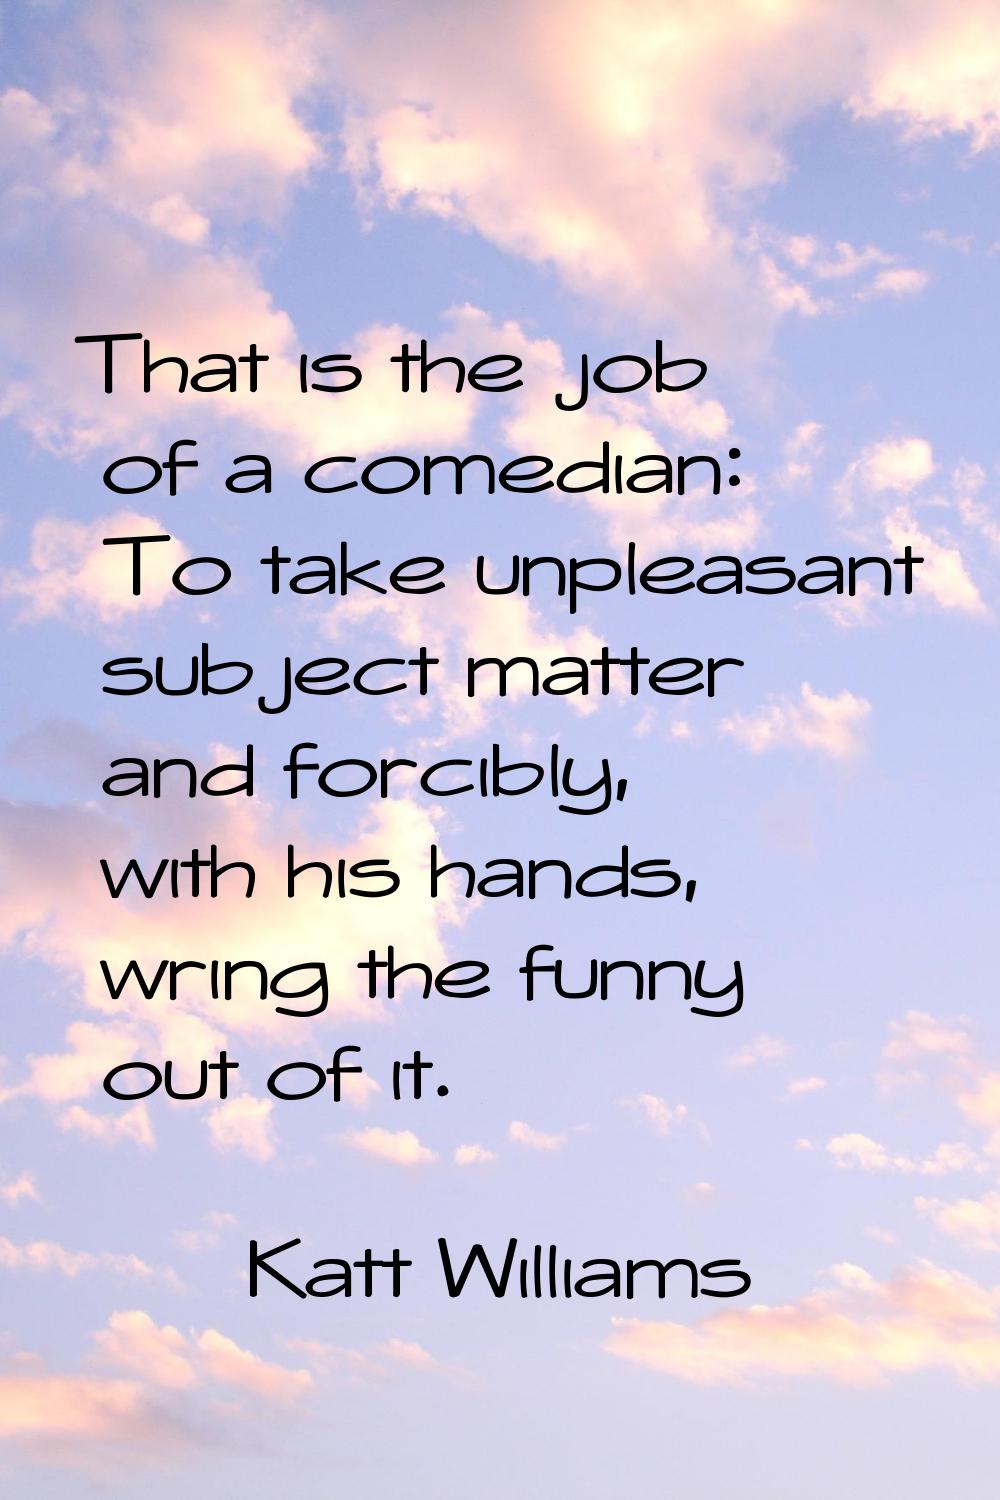 That is the job of a comedian: To take unpleasant subject matter and forcibly, with his hands, wrin